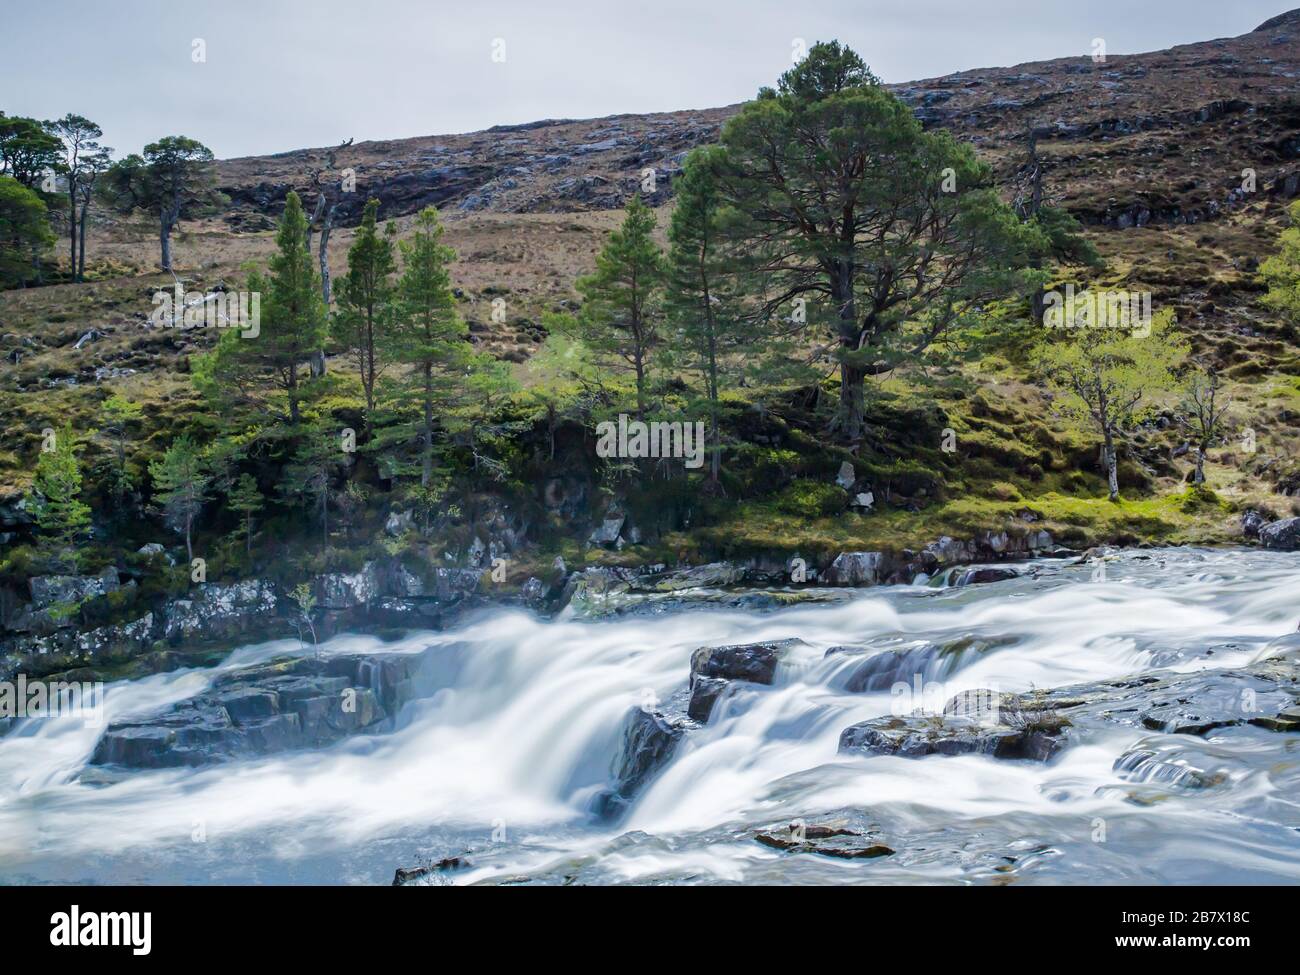 Falls on the Garbh uisge river just below Loch Monar at the head of Glen Strathfarrar, which empties into the River Farrar in Highlands of Scotland Stock Photo